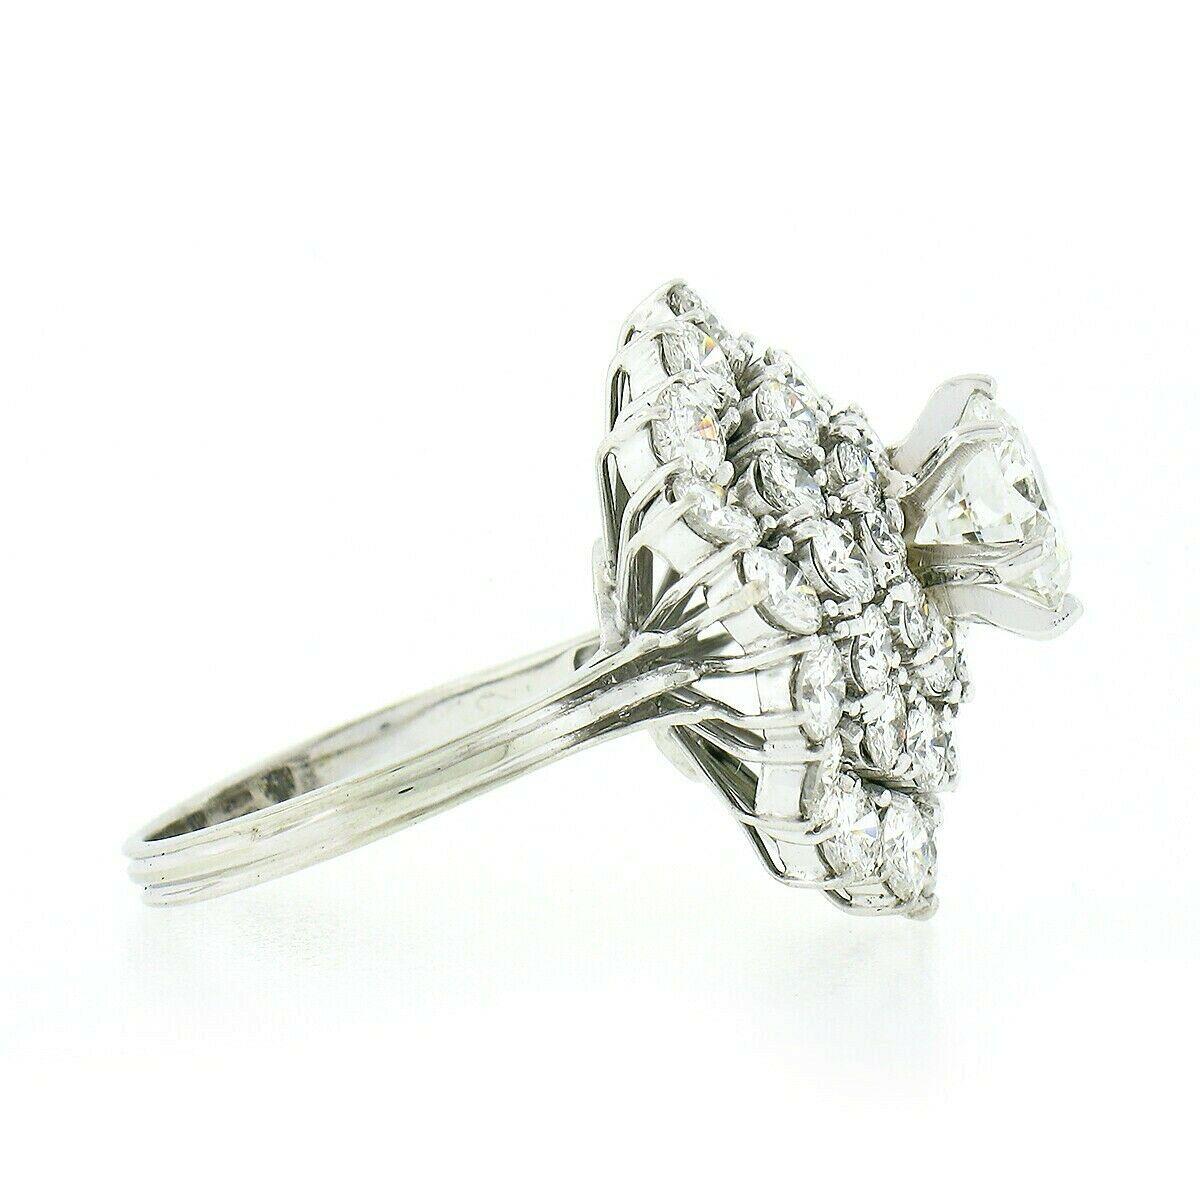 Vintage Handmade 18k White Gold 5.74ct GIA E VVS Diamond Ballerina Cocktail Ring In Excellent Condition For Sale In Montclair, NJ